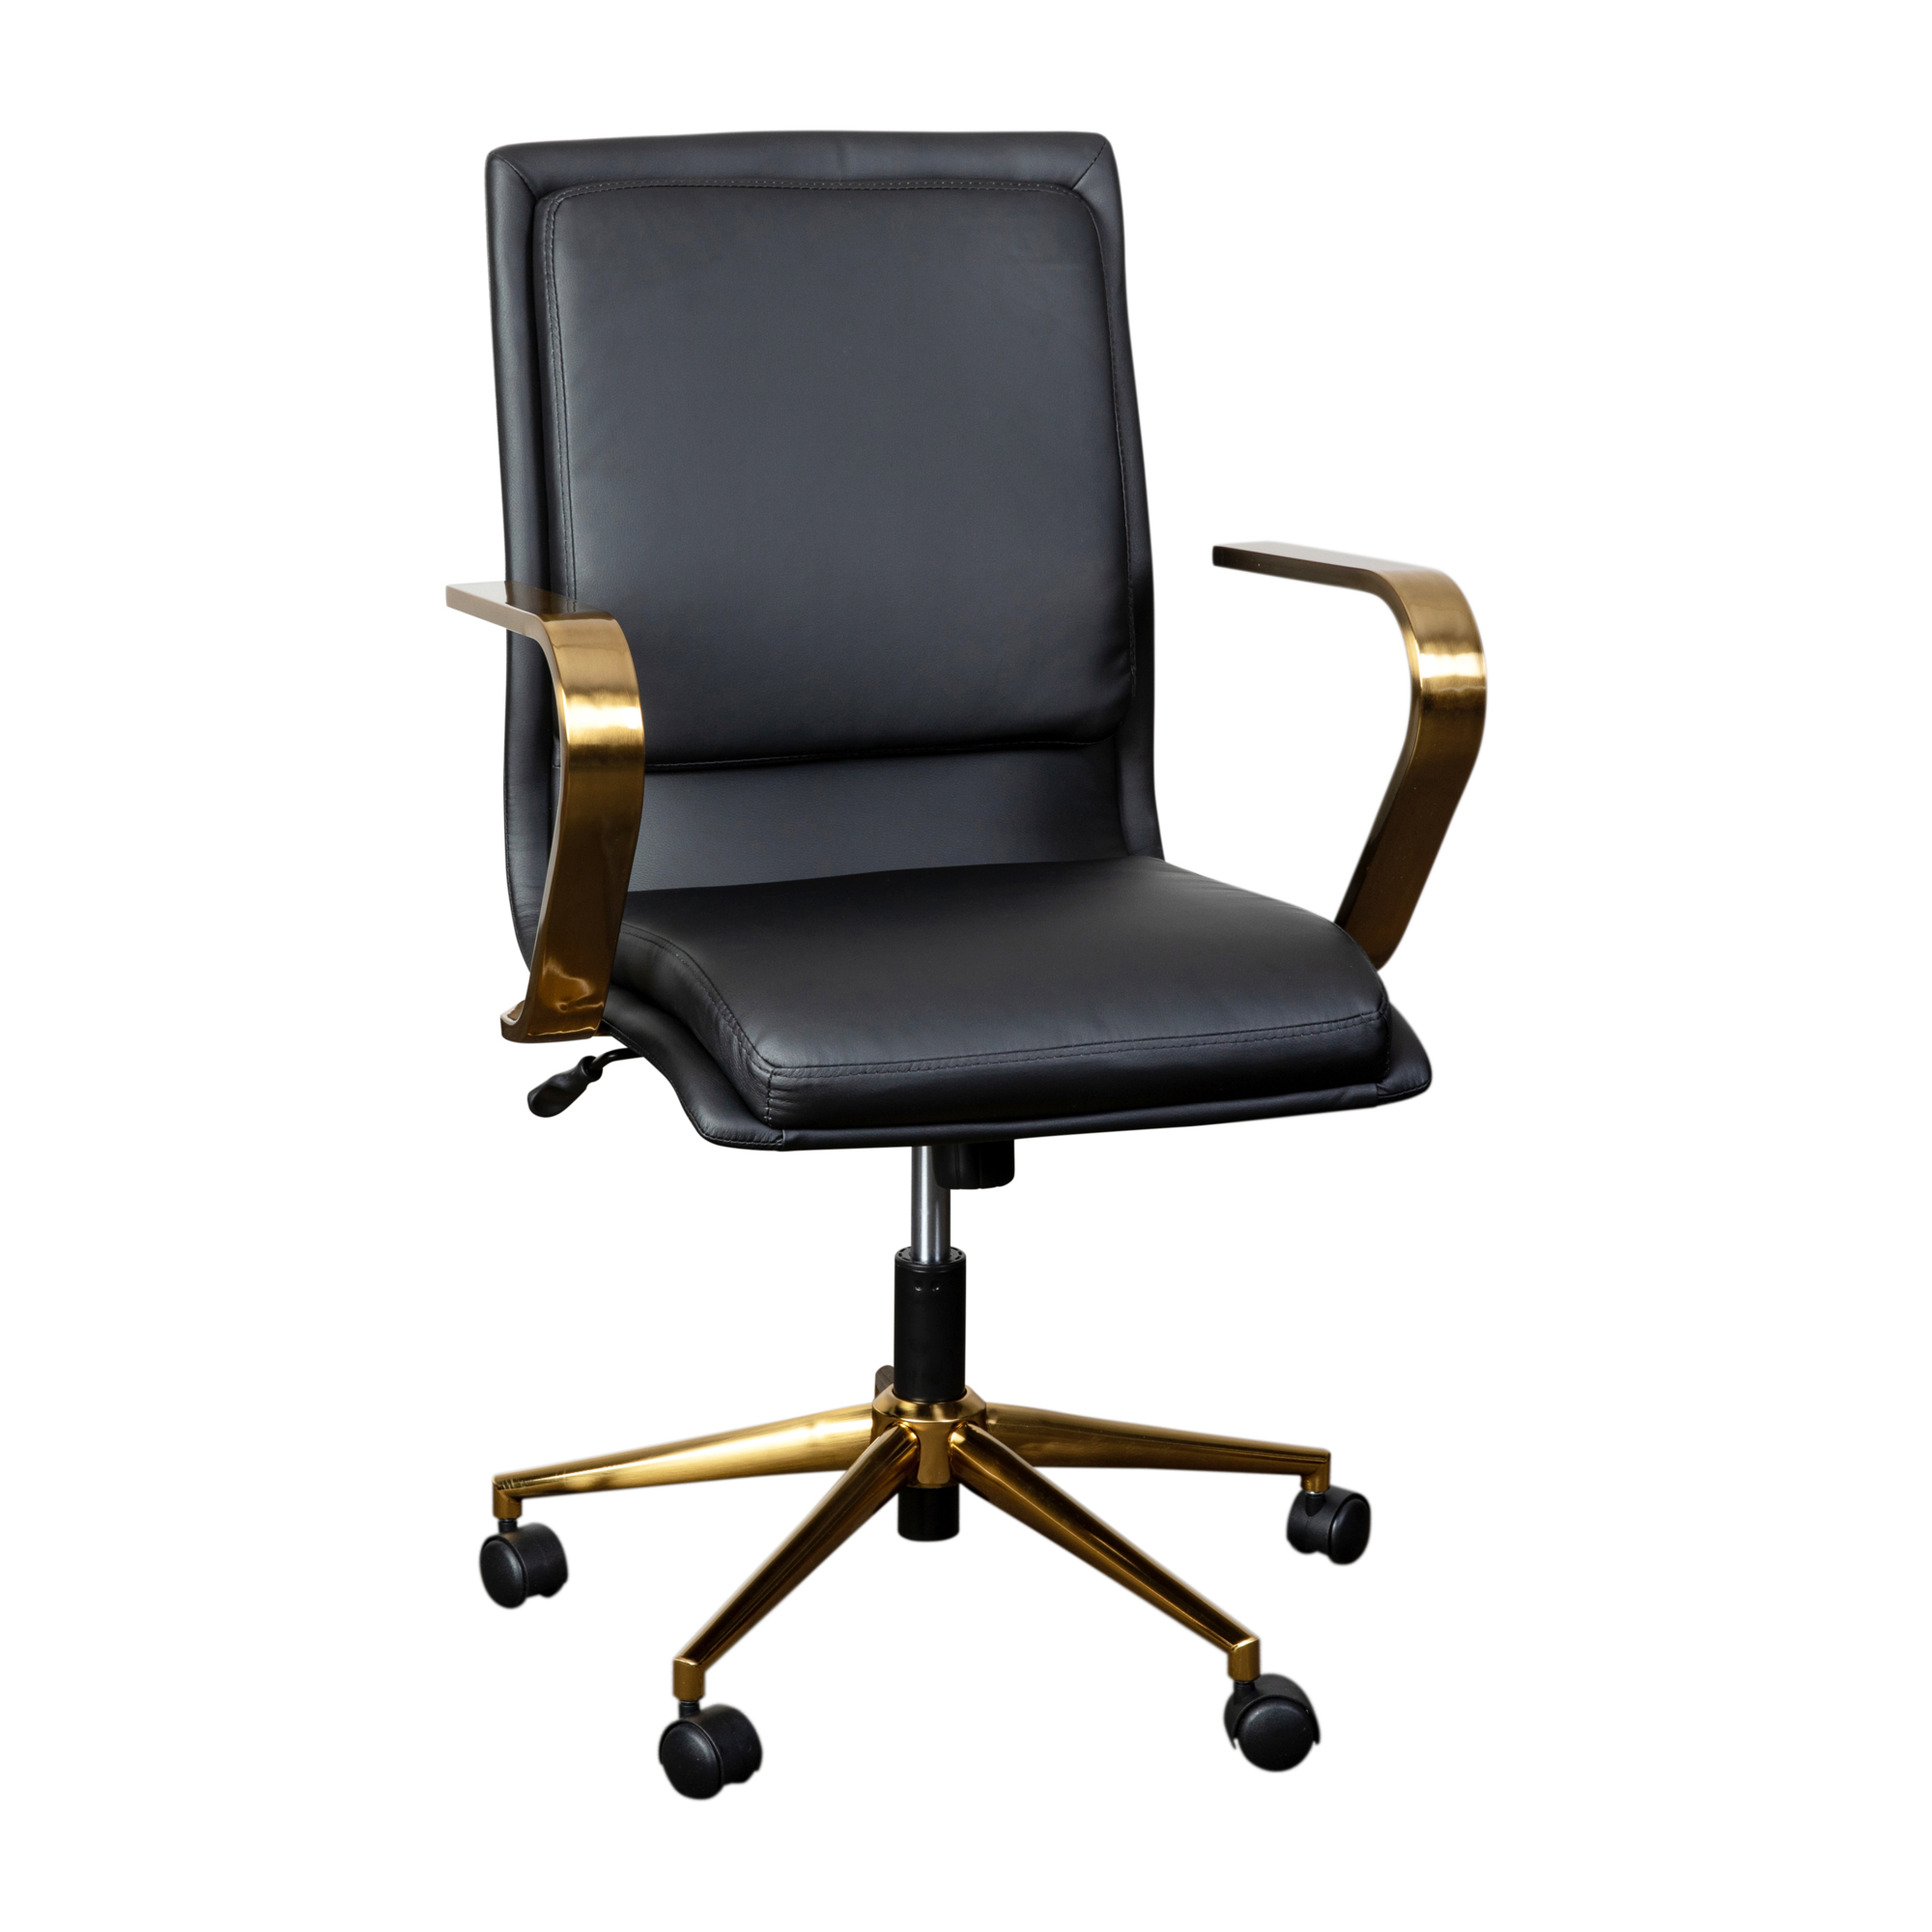 Flash Furniture, Black LeatherSoft Office Chair with Gold Arms, Primary Color Black, Included (qty.) 1, Model GO21111BBKGLD